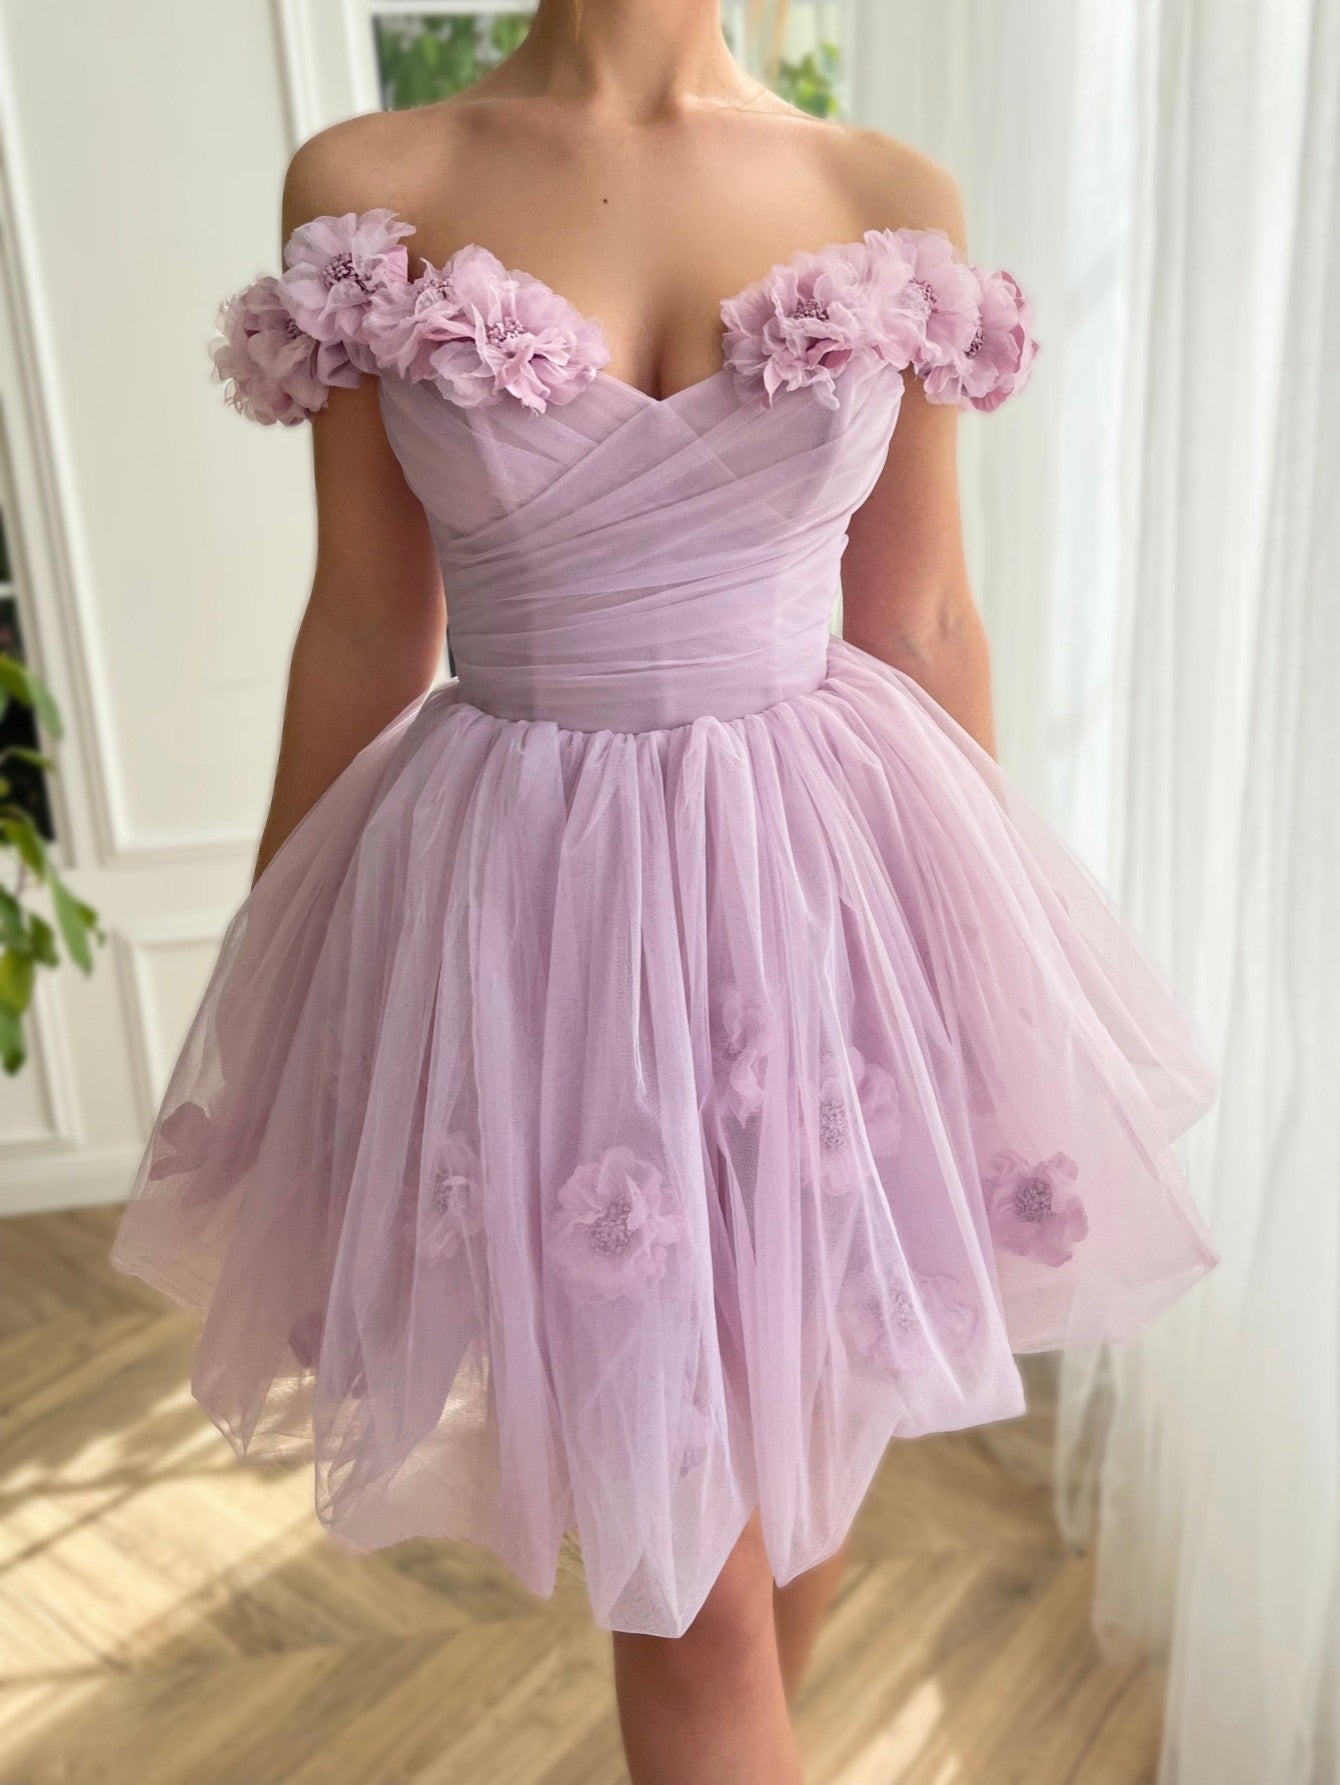 Lilac Corset Strapless Short Tulle Homecoming Dress